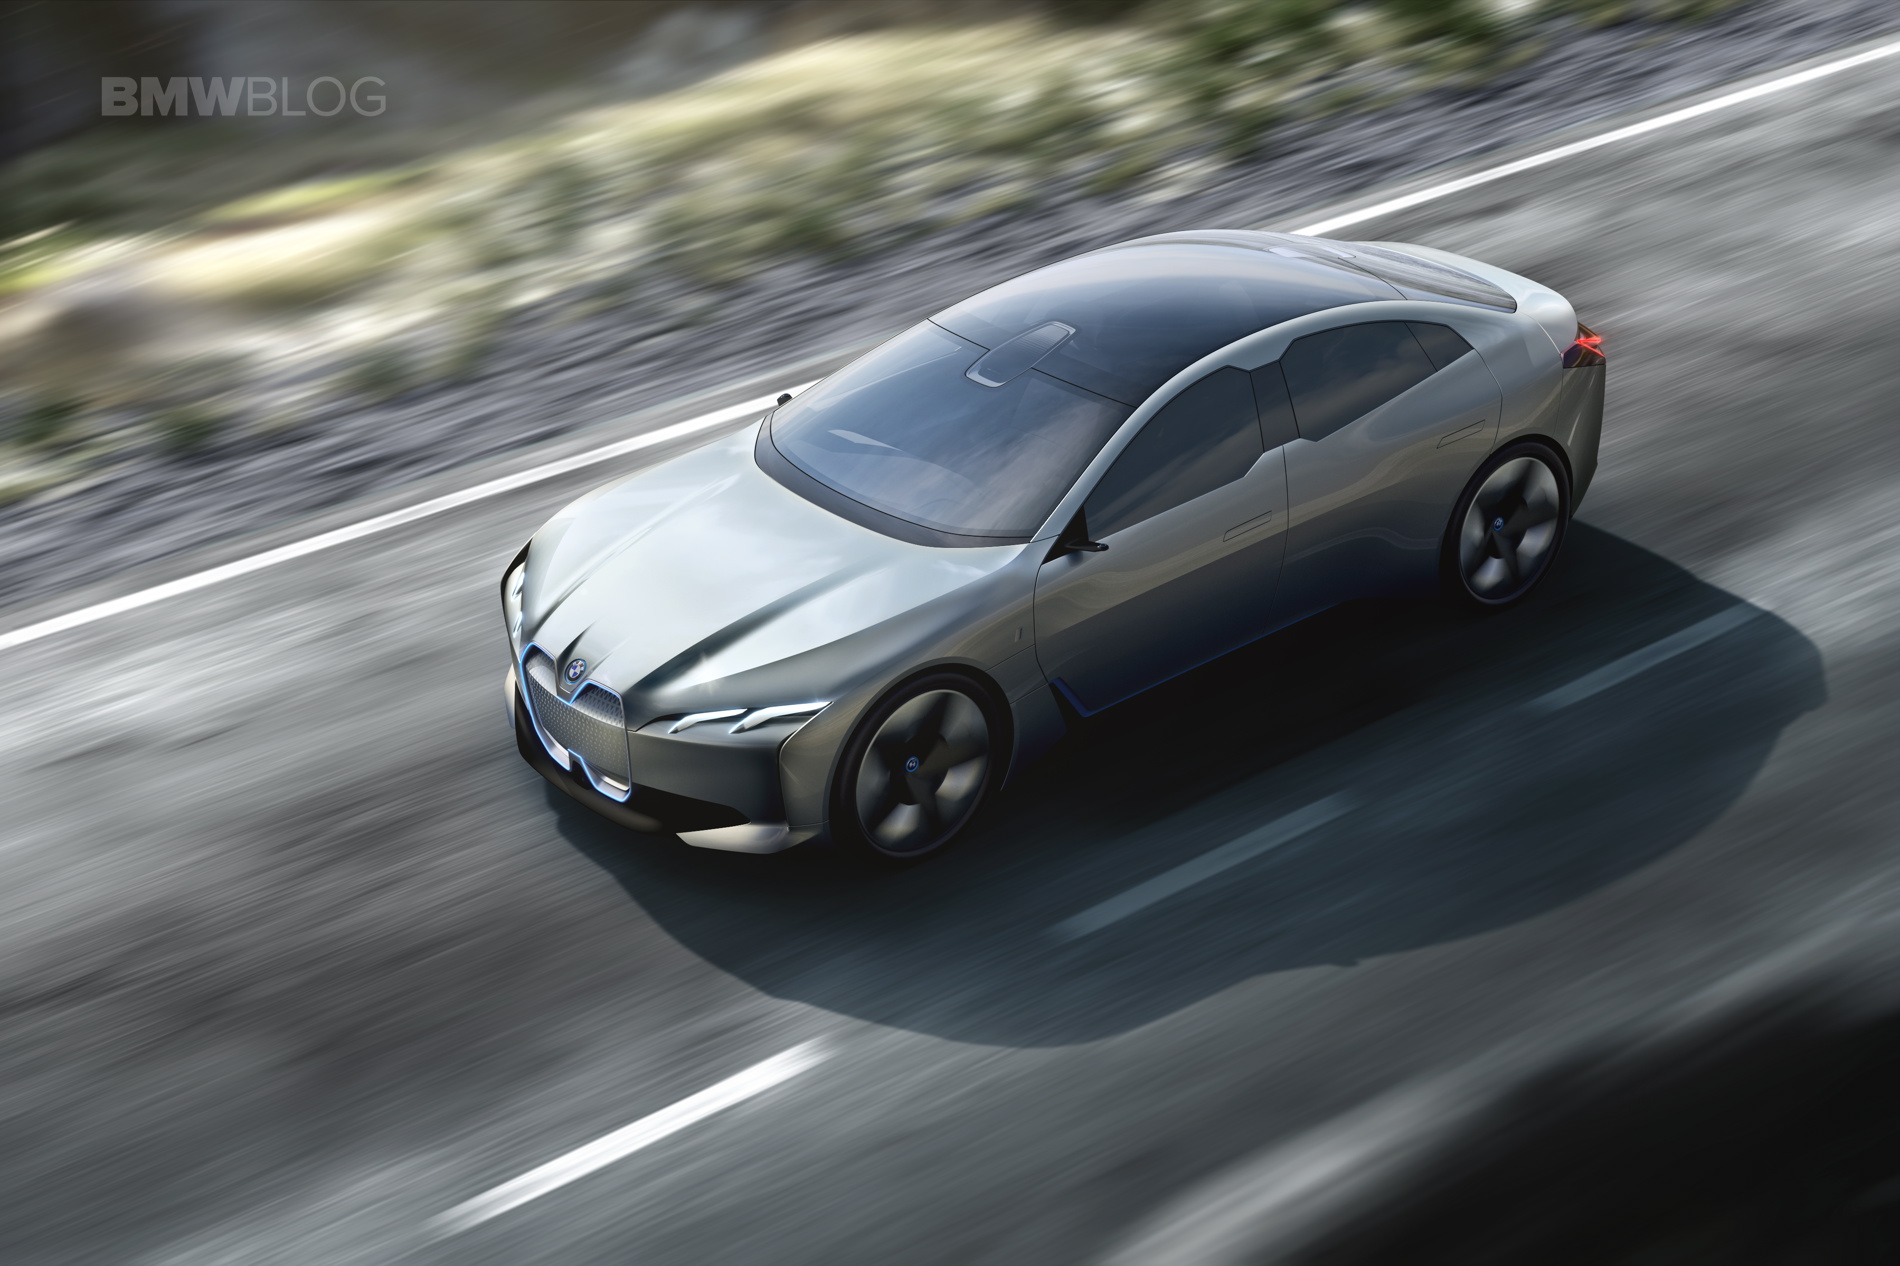 Electric Invasion — Meet Some Of The Electric BMWs coming by 2025